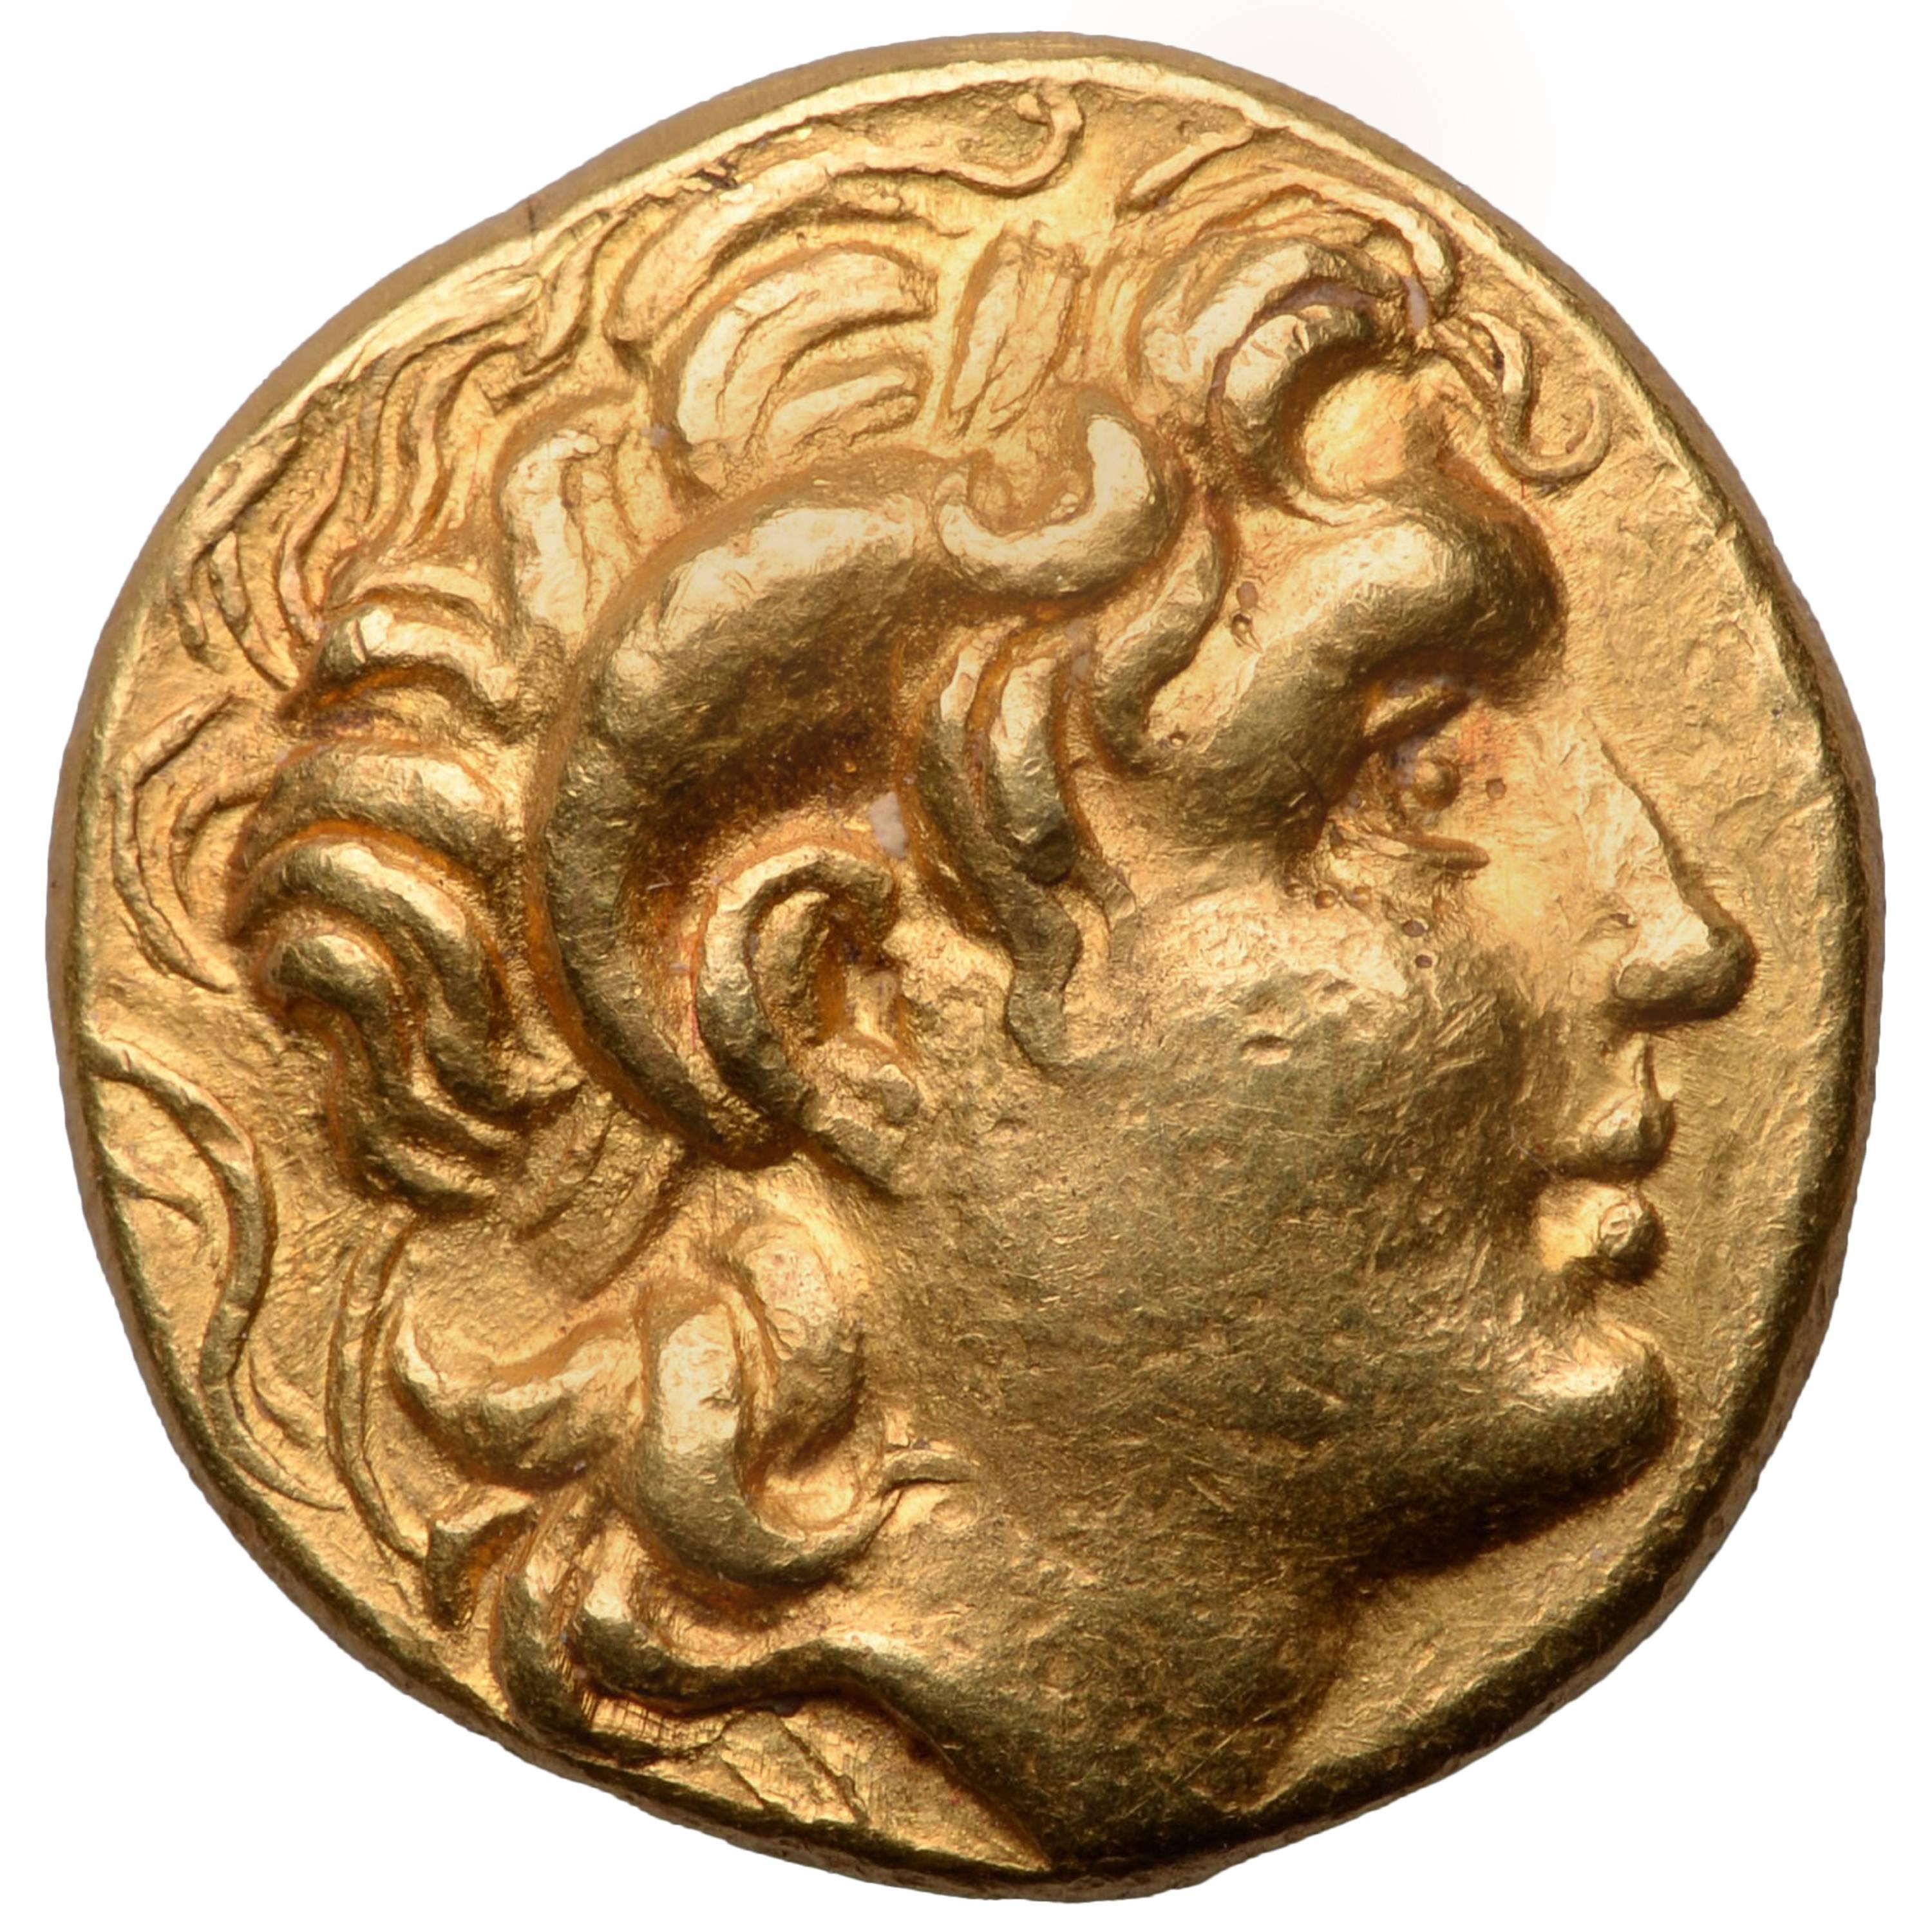 Ancient Greek Gold Coin of Alexander the Great, 281 BC